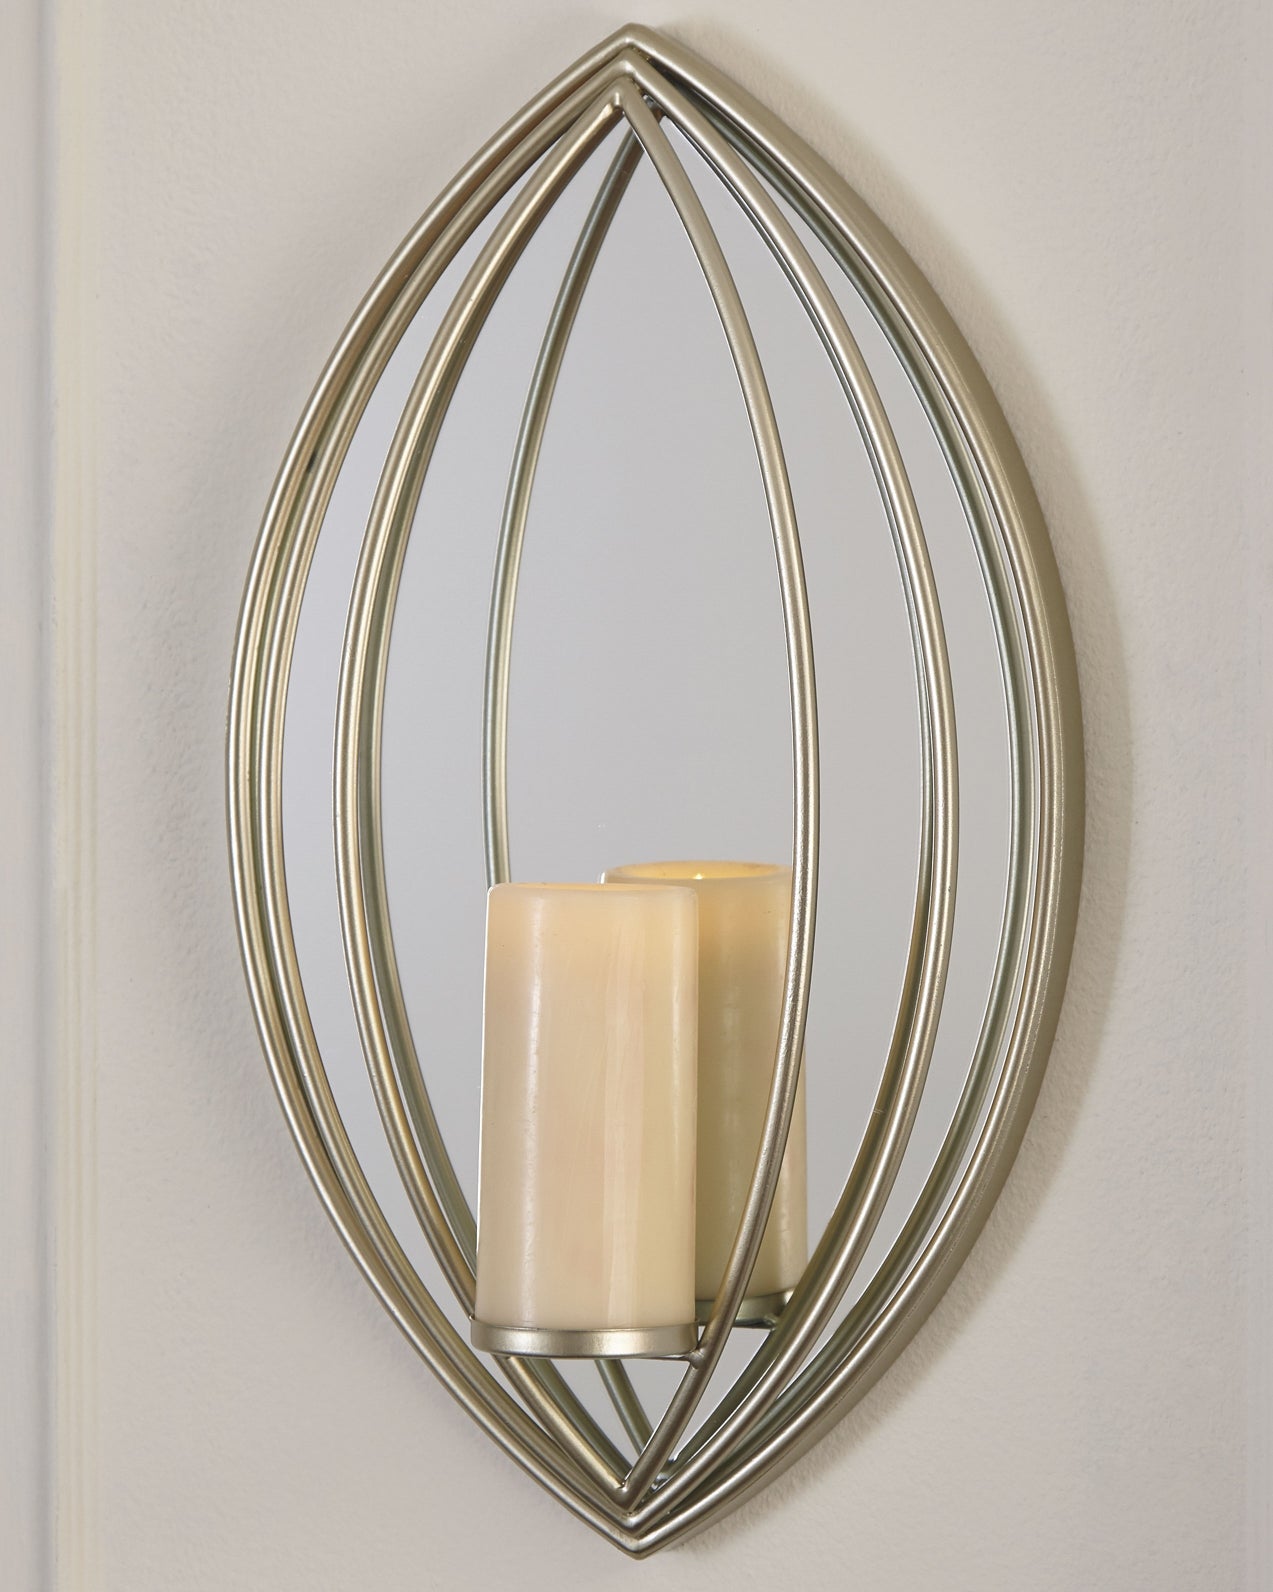 Ashley Express - Donnica Wall Sconce Wilson Furniture (OH)  in Bridgeport, Ohio. Serving Bridgeport, Yorkville, Bellaire, & Avondale